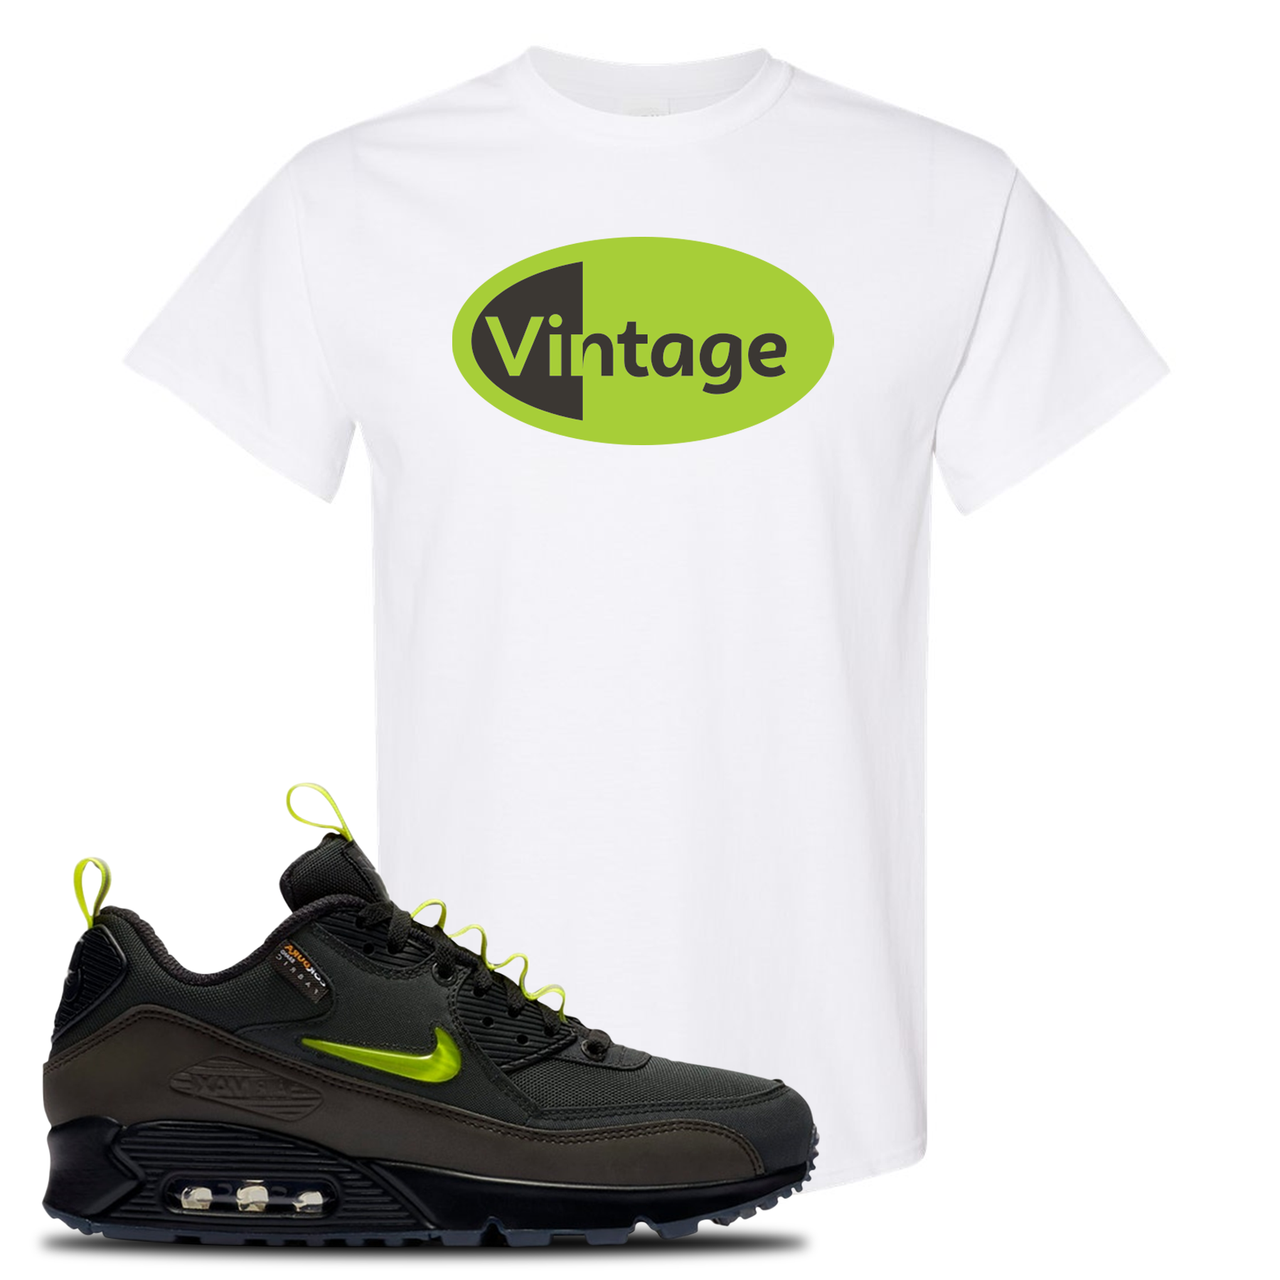 The Basement X Air Max 90 Manchester Vintage Oval White Sneaker Hook Up T-Shirt